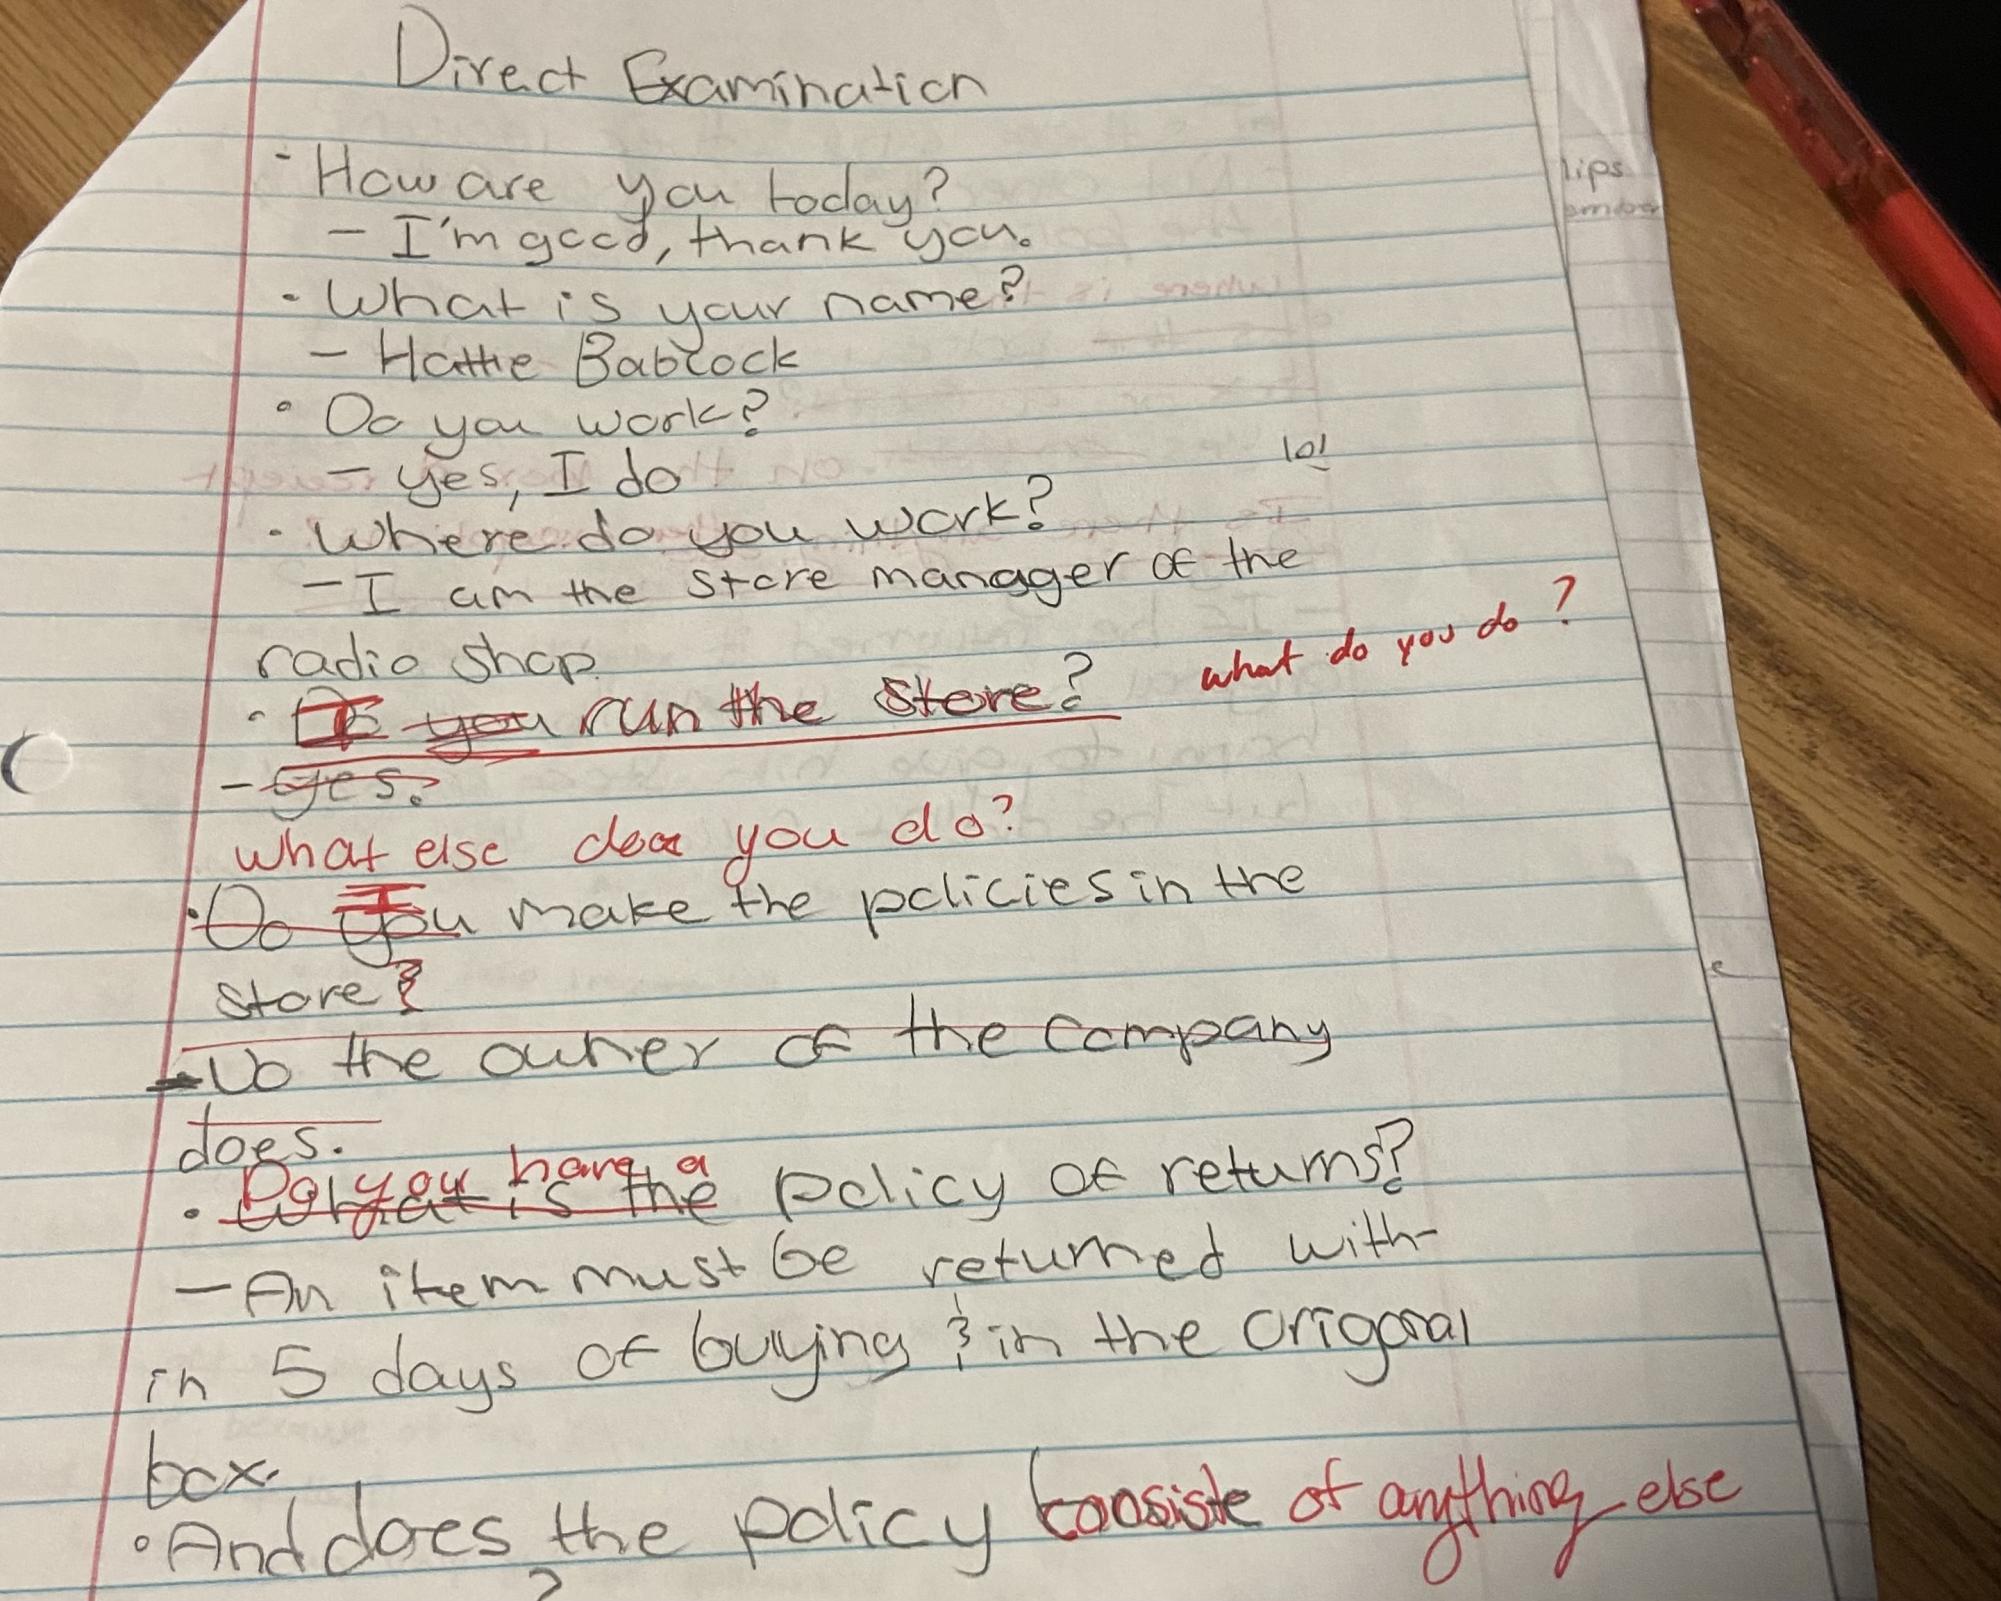 Brainstorming questions for a direct examination, Mr. Garcia provides edits to his students on details to improve for their interrogations. (Courtesy of Daniela Diaz)